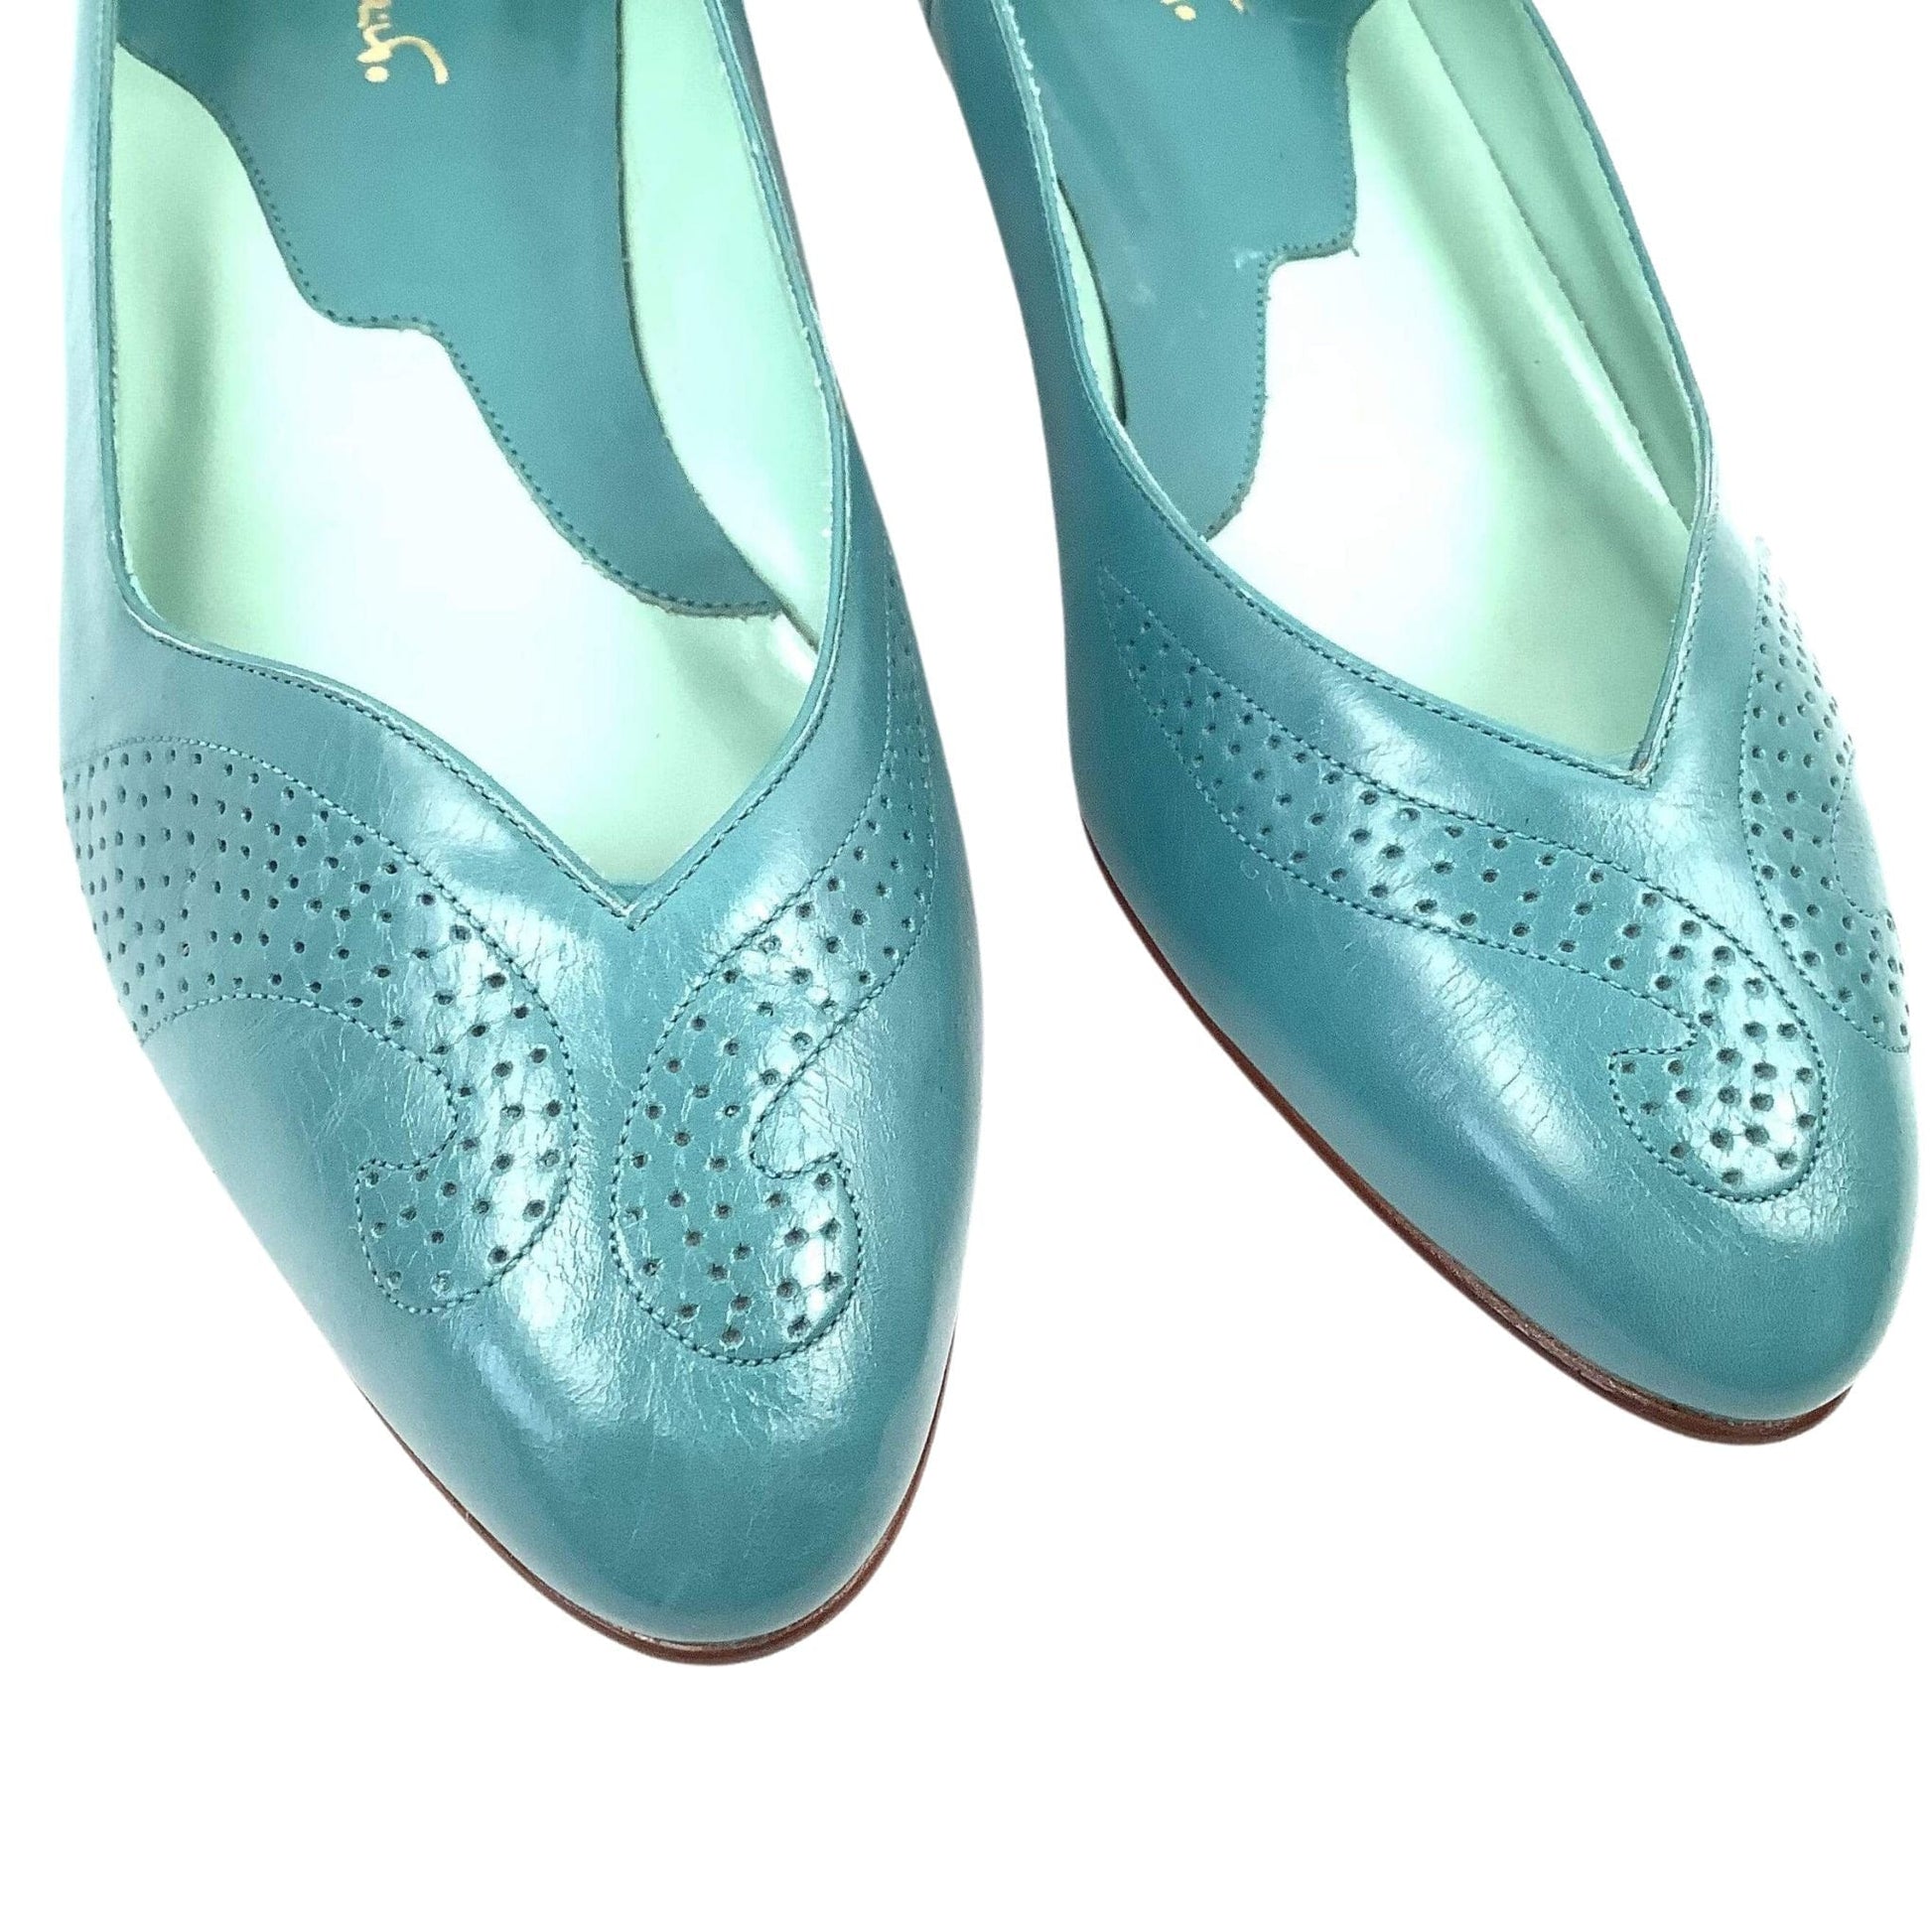 1980s Teal Flat Shoes 8 / Teal Blue / Classic